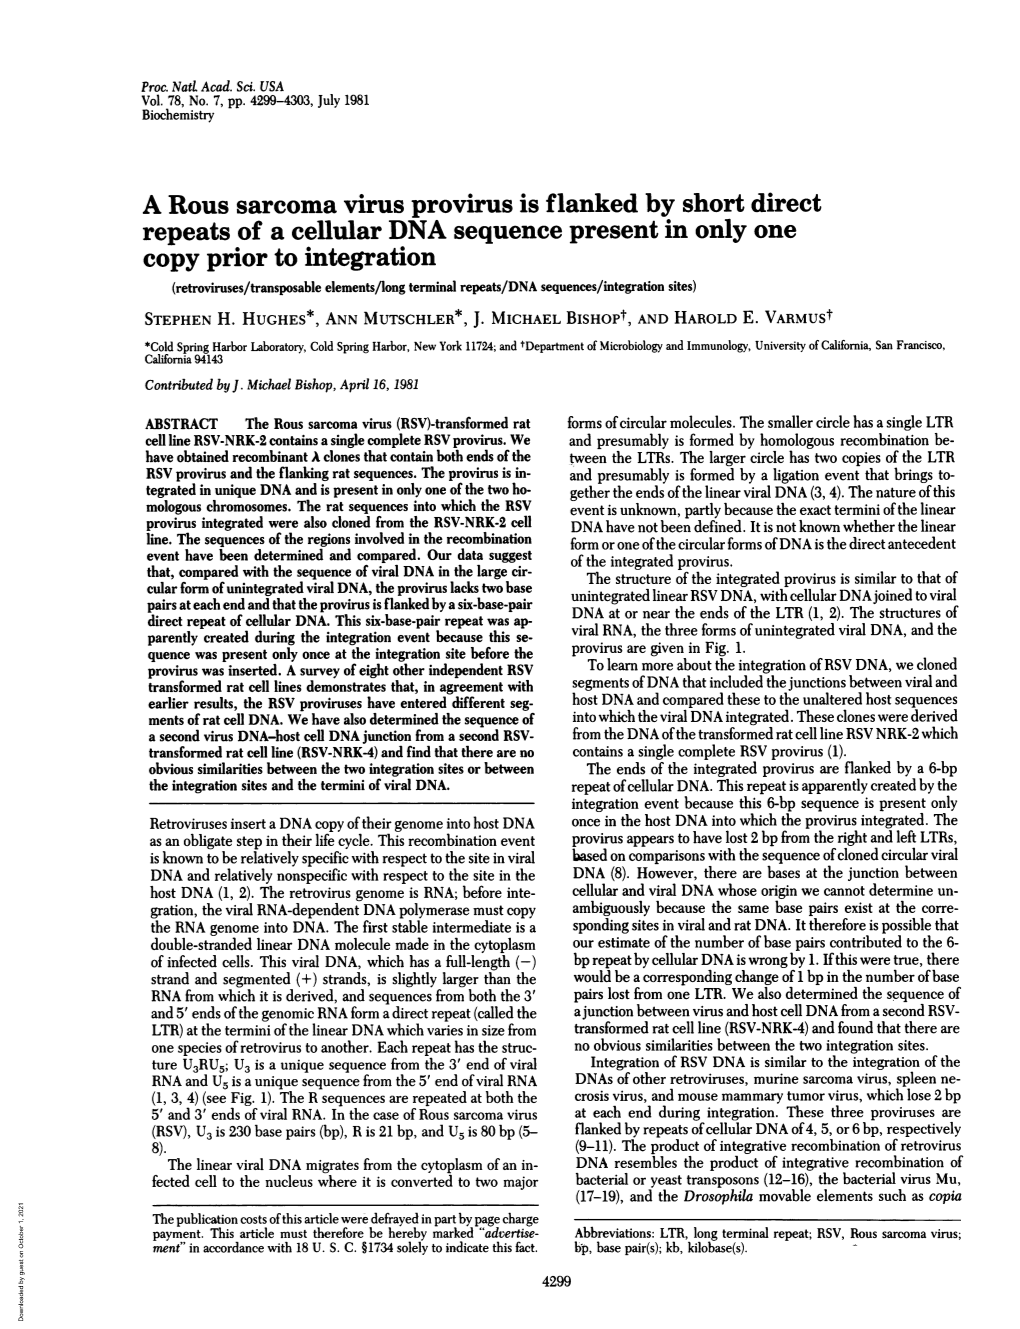 A Rous Sarcoma Virus Provirus Is Flankedby Short Direct Repeats of A